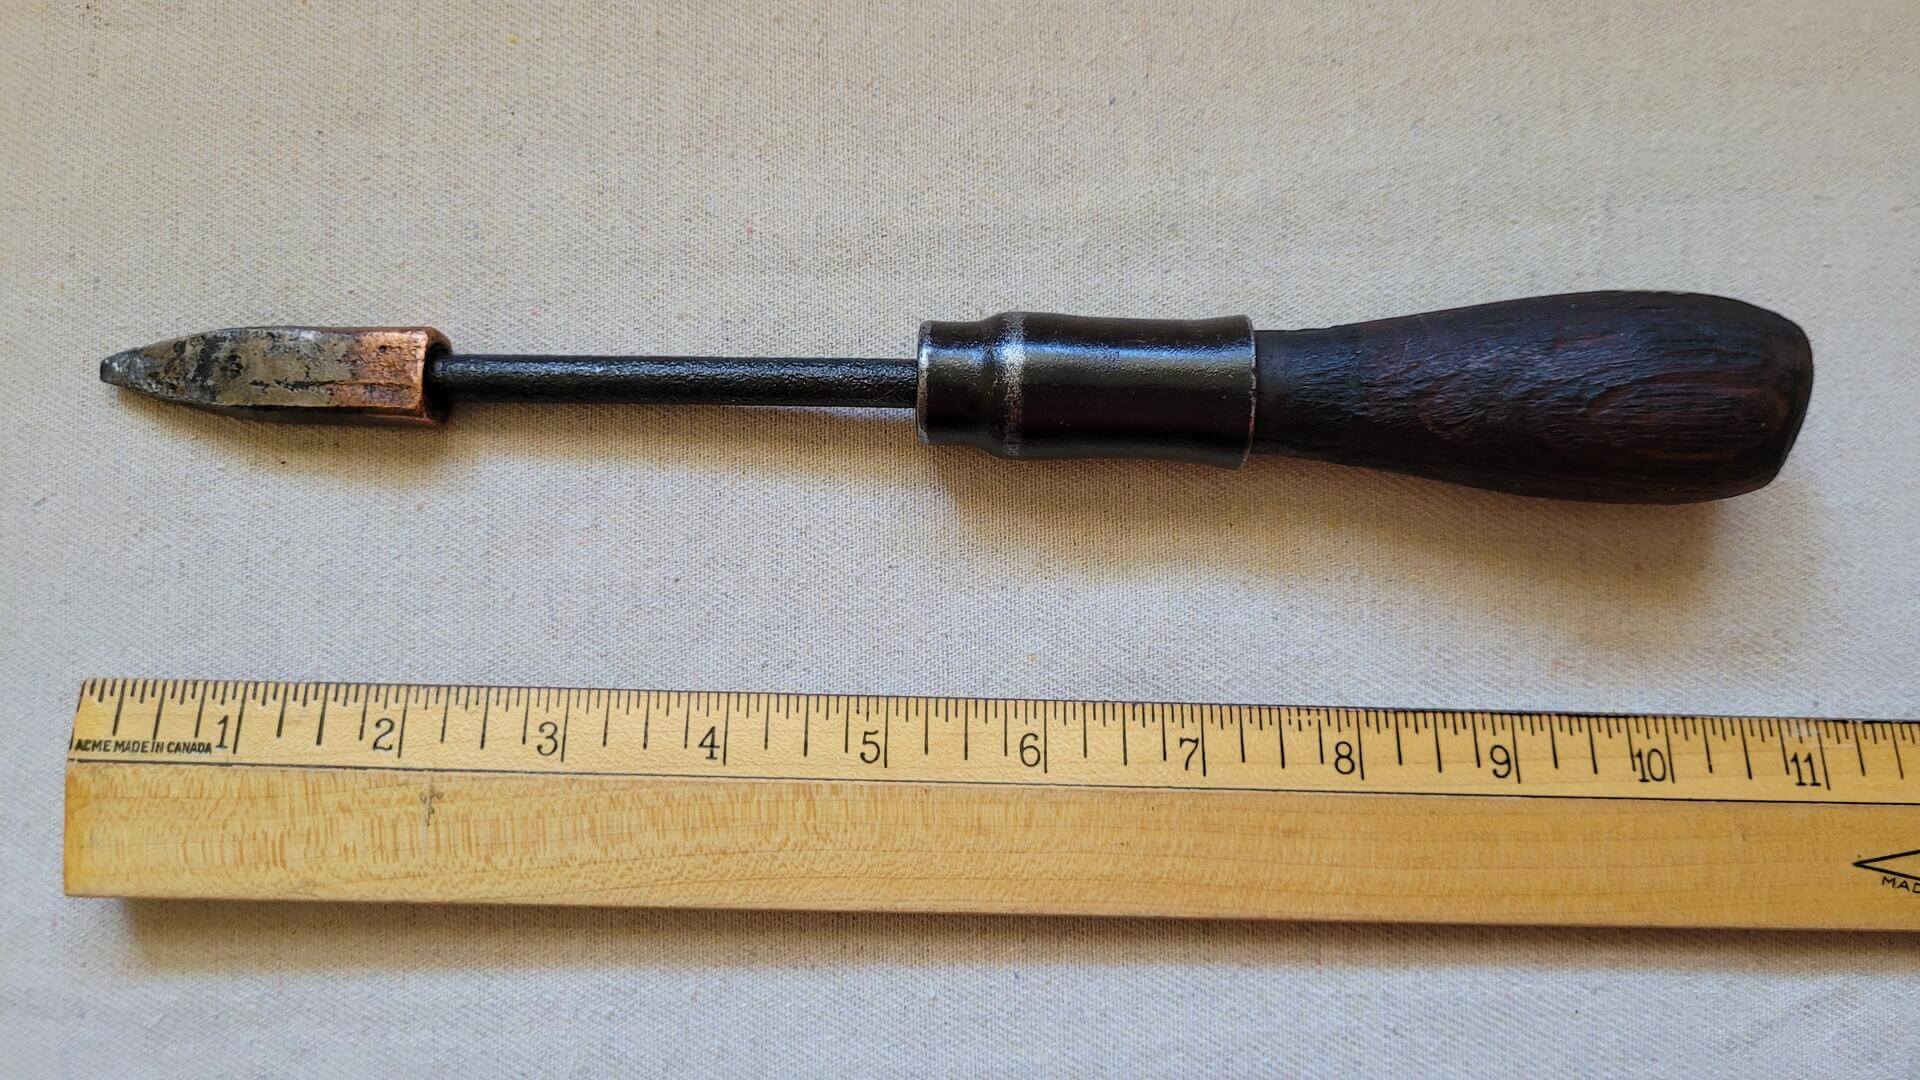 Vintage copper head soldering iron with wooden handle 11" inches long. Antique primitive collectible tinsmith, blacksmith, and plumbing soldering tools